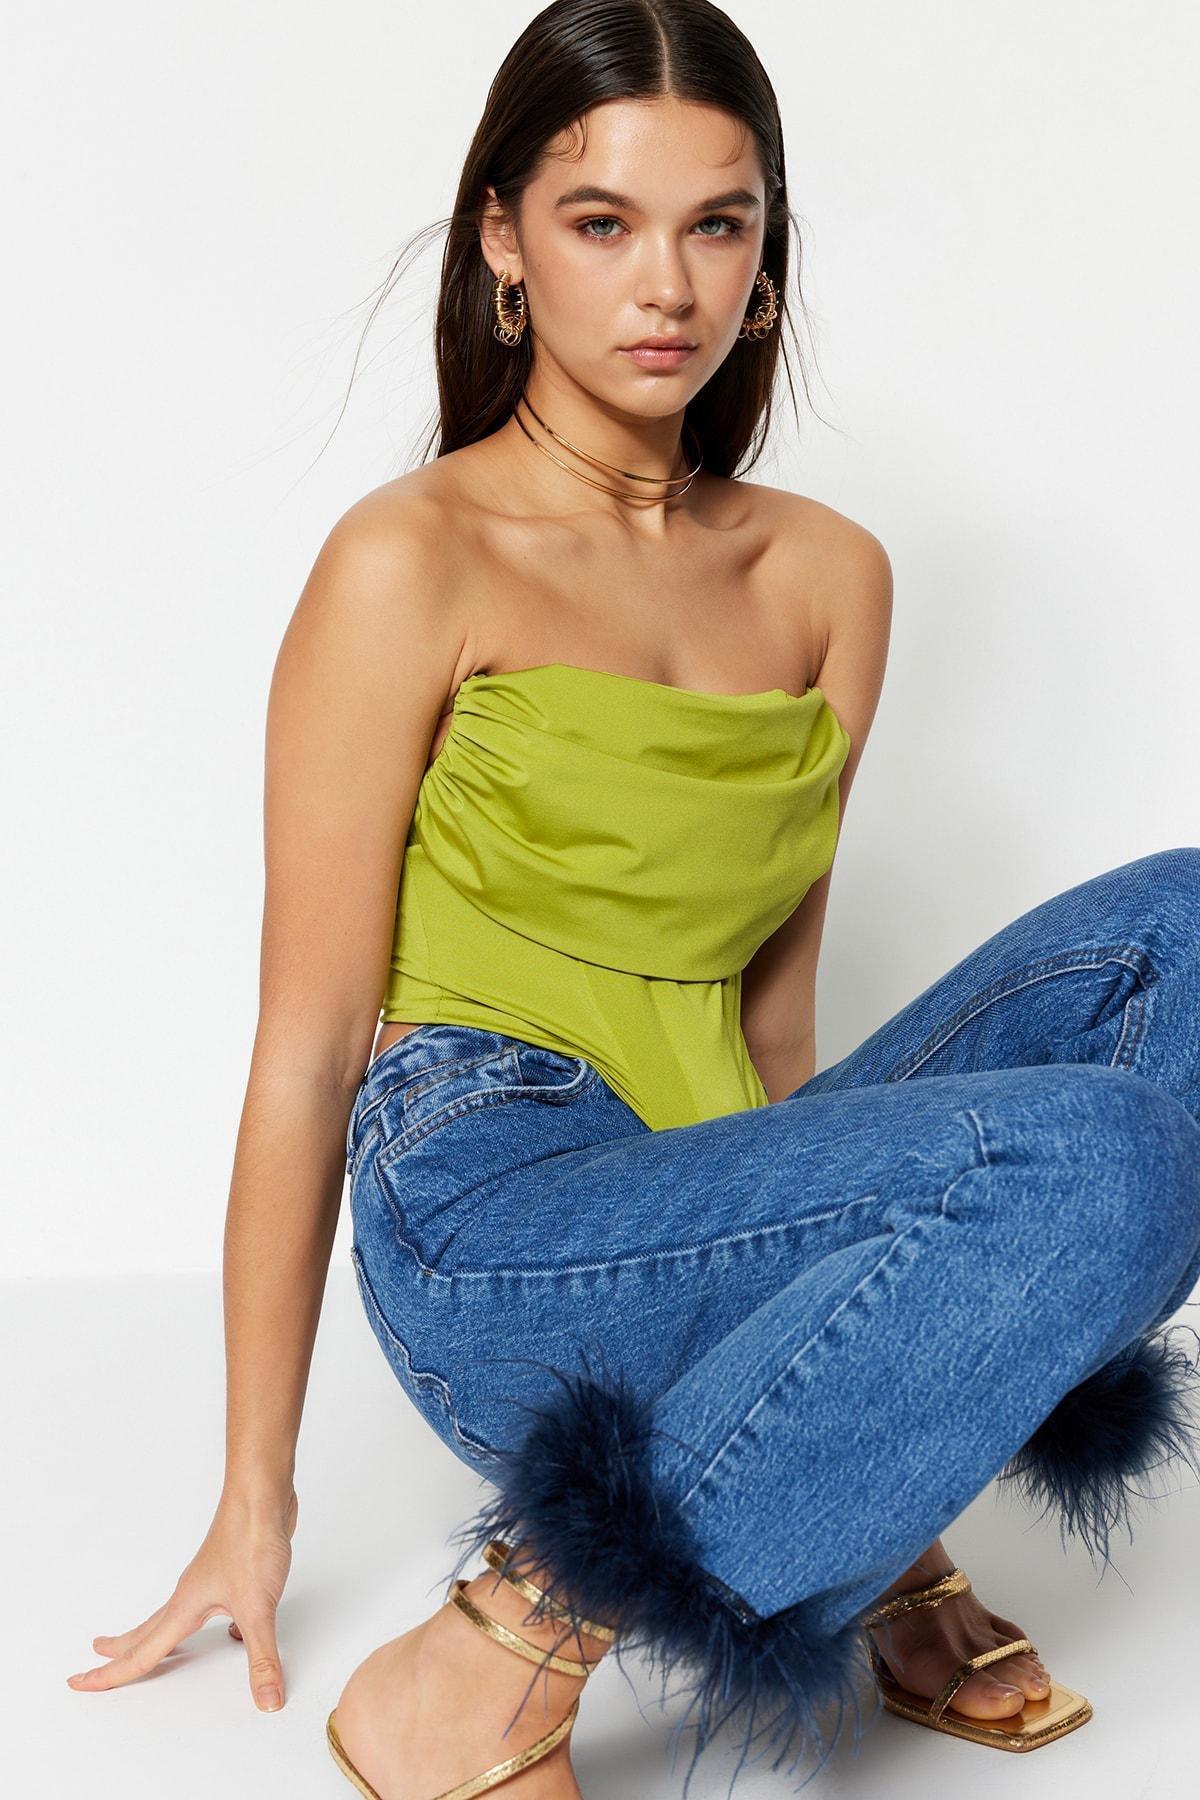 Trendyol - Green Fitted Strapless Crop Top